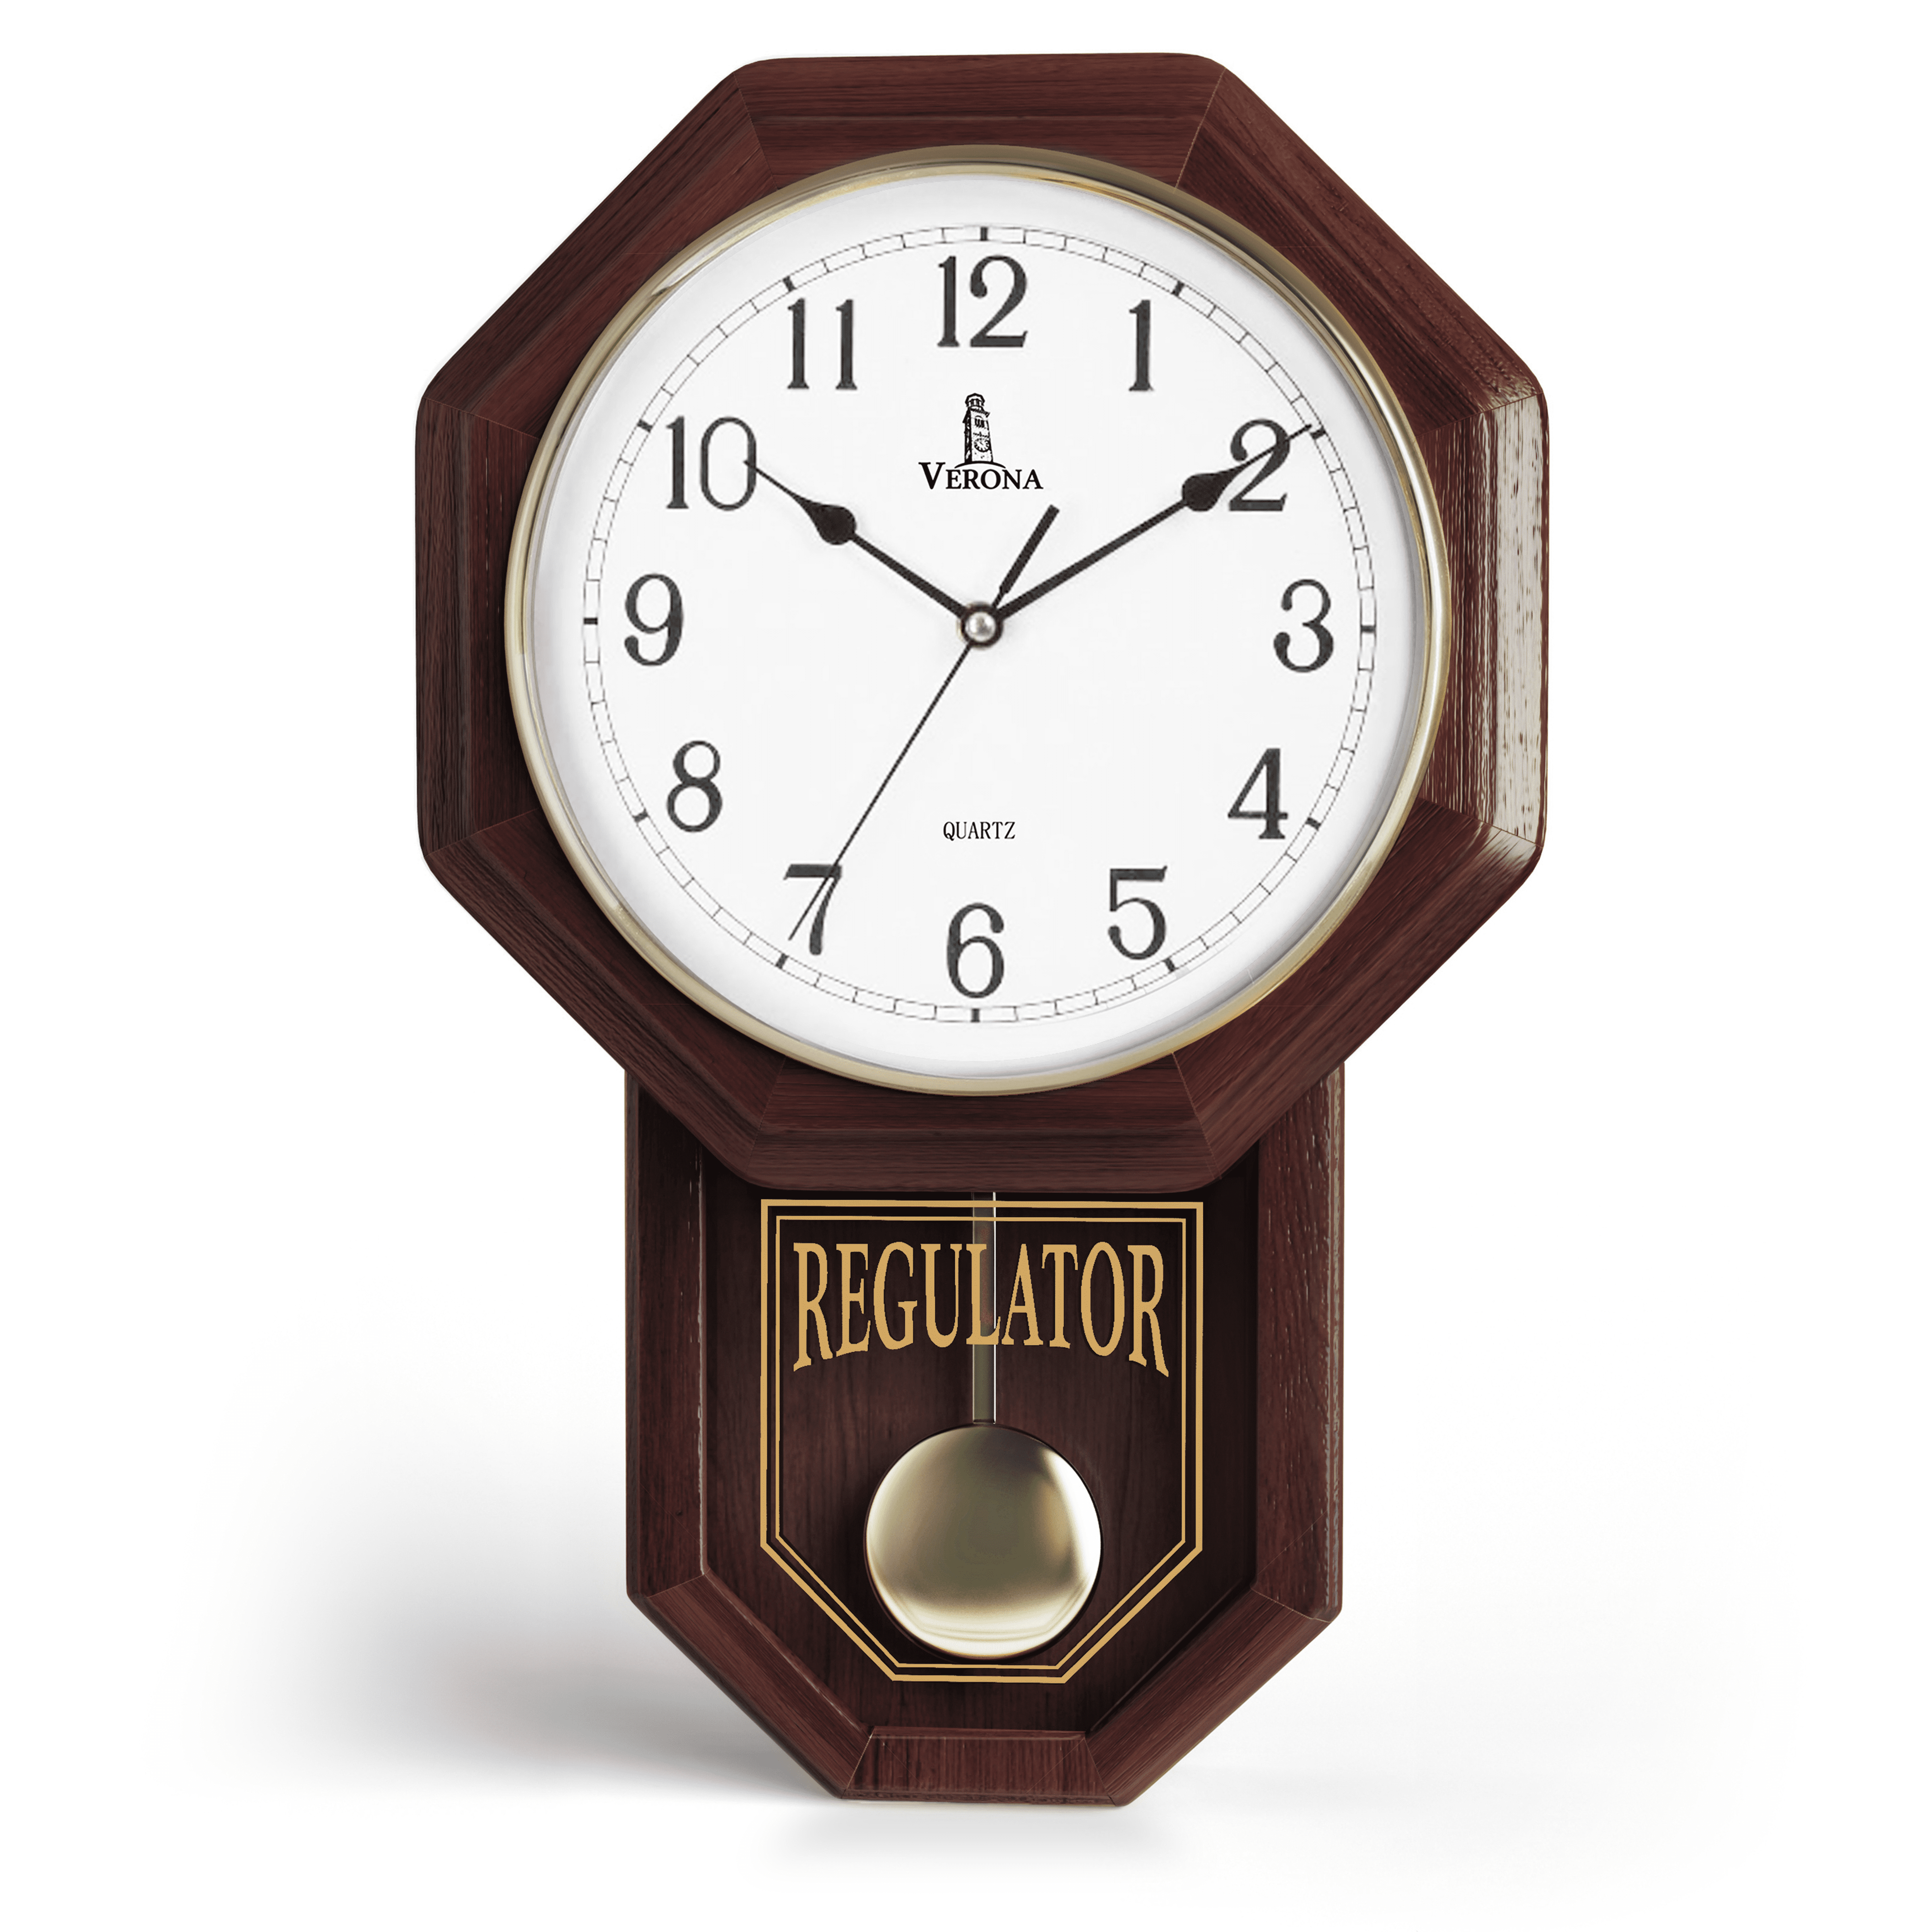 Retro Wooden Wall Clock 10 Inch He Move Noiseless Round Battery Operated Gift for Mum Dad Home Office